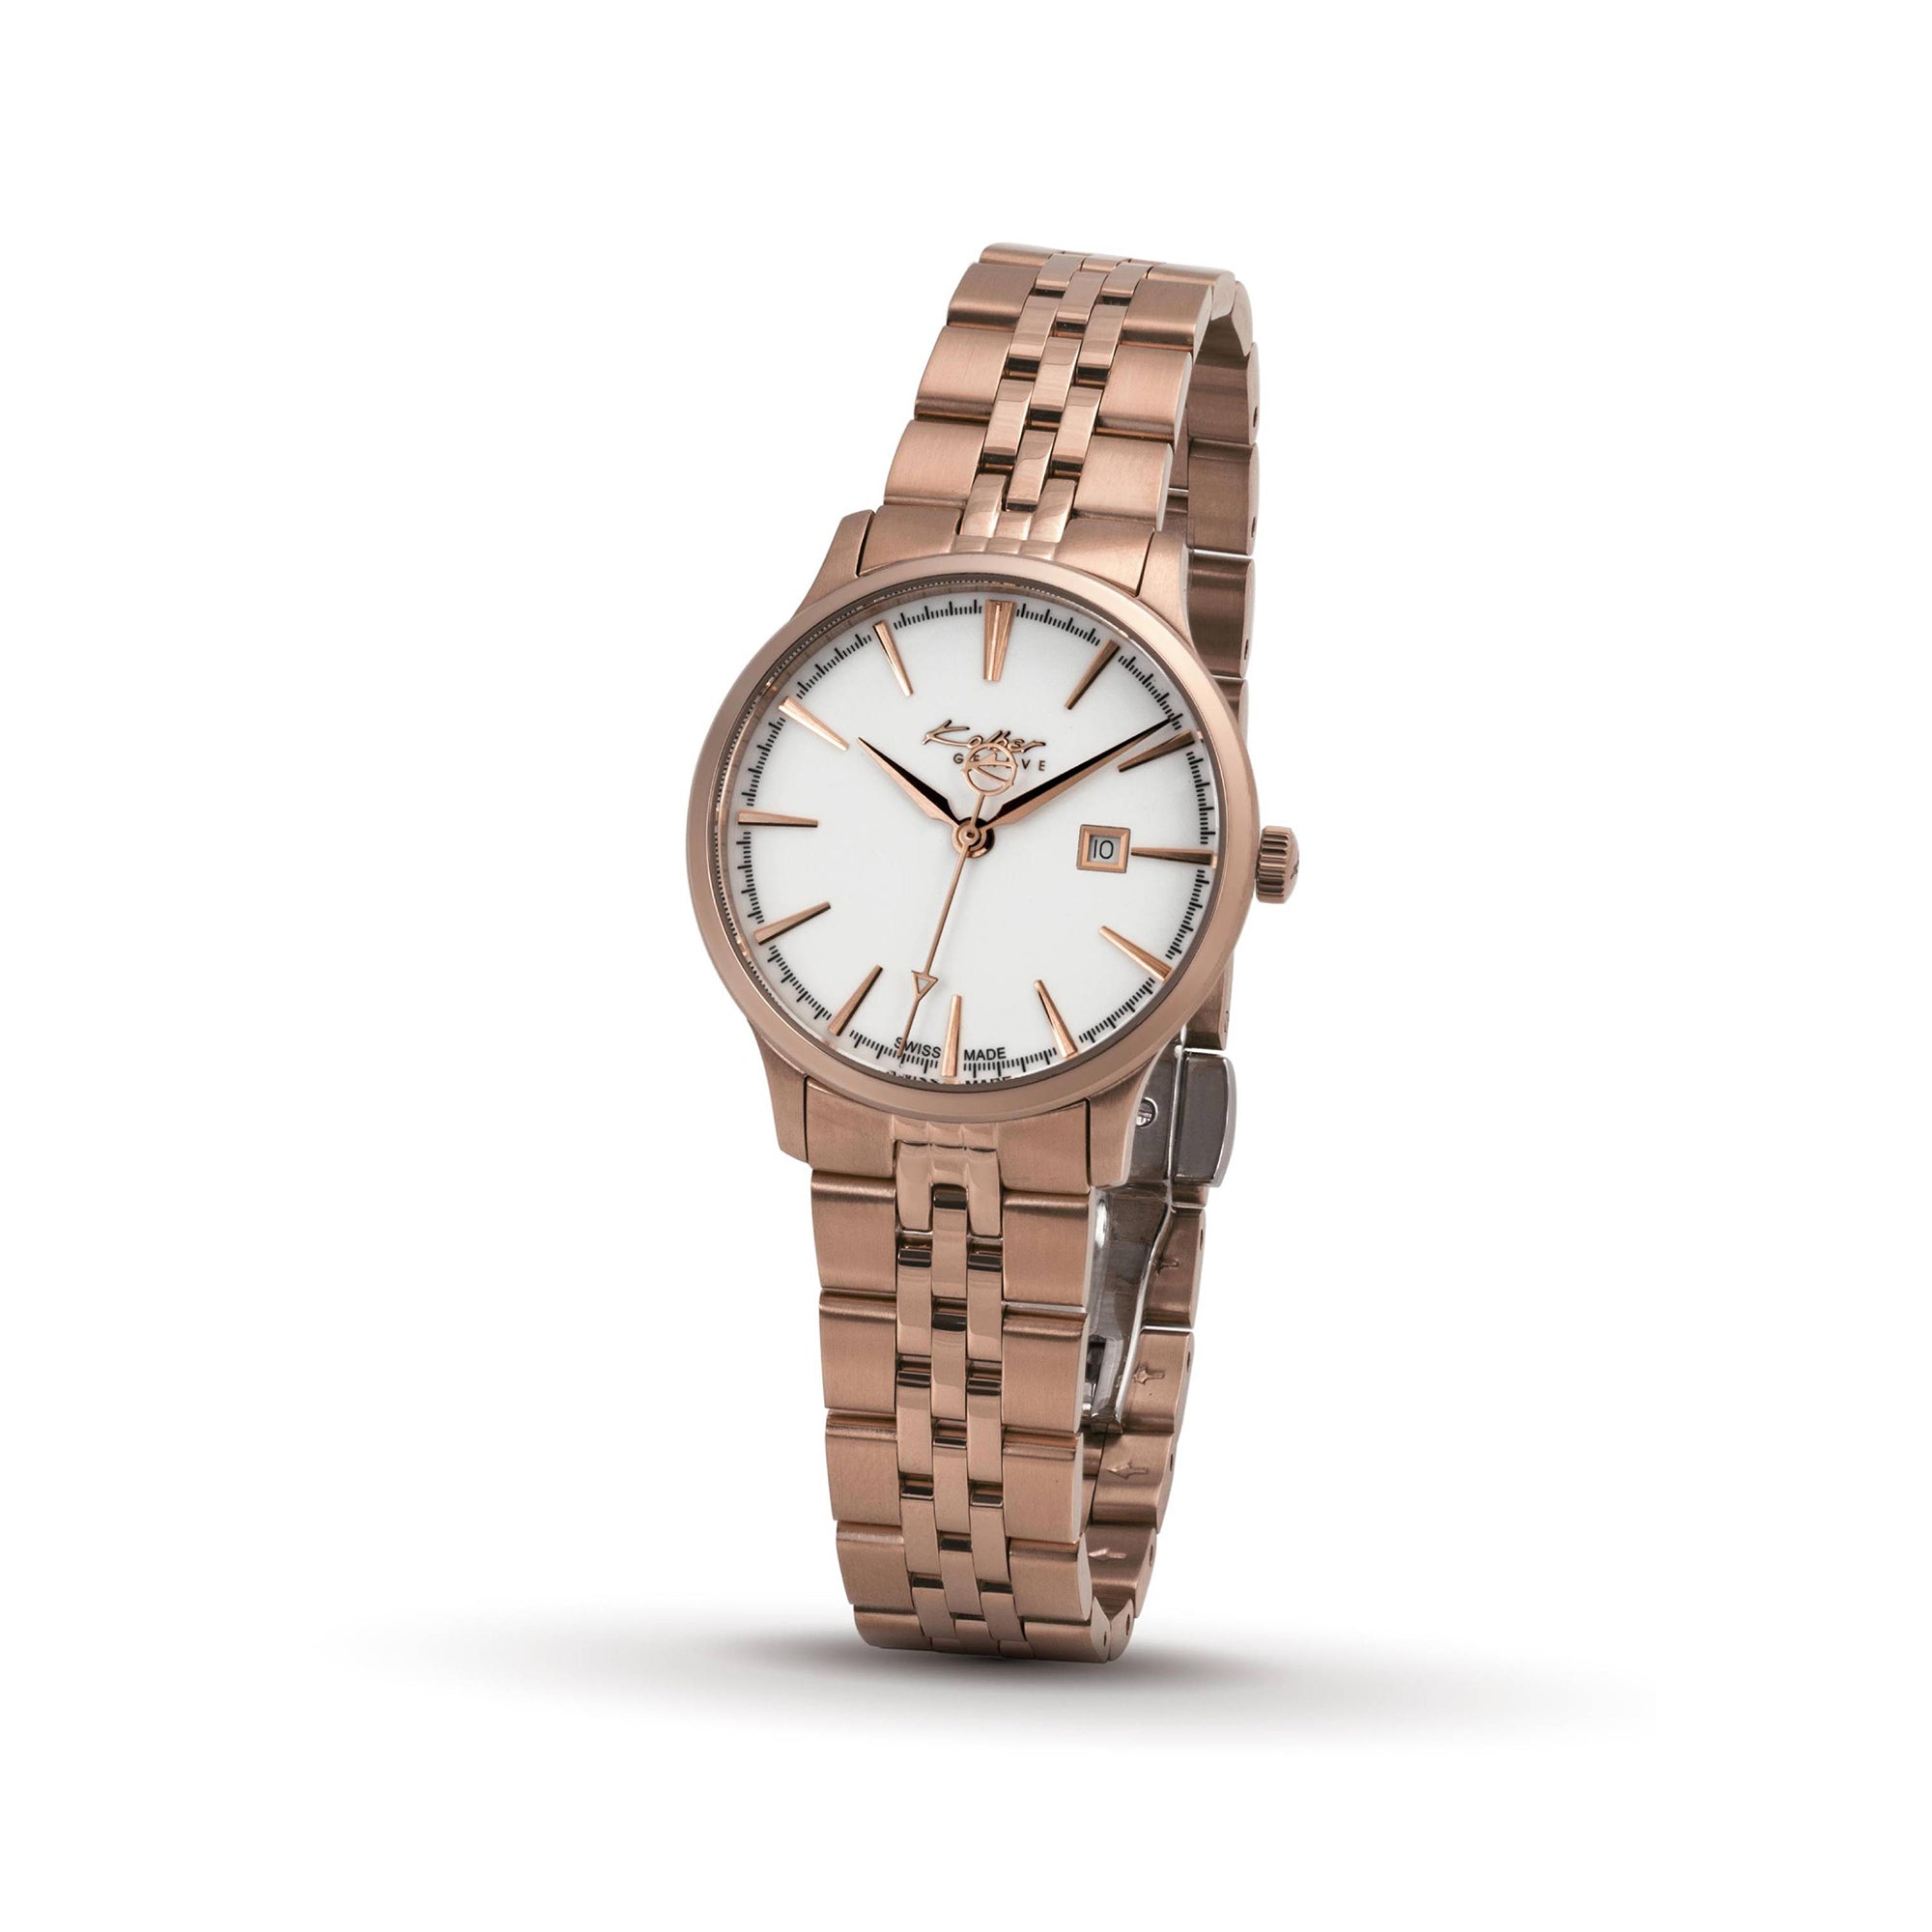 SM LADIES WITH DOUBLE RING STONE EMBEDDED BEZEL TWO TONE GOLD WATCH - Shop  in Siliguri City